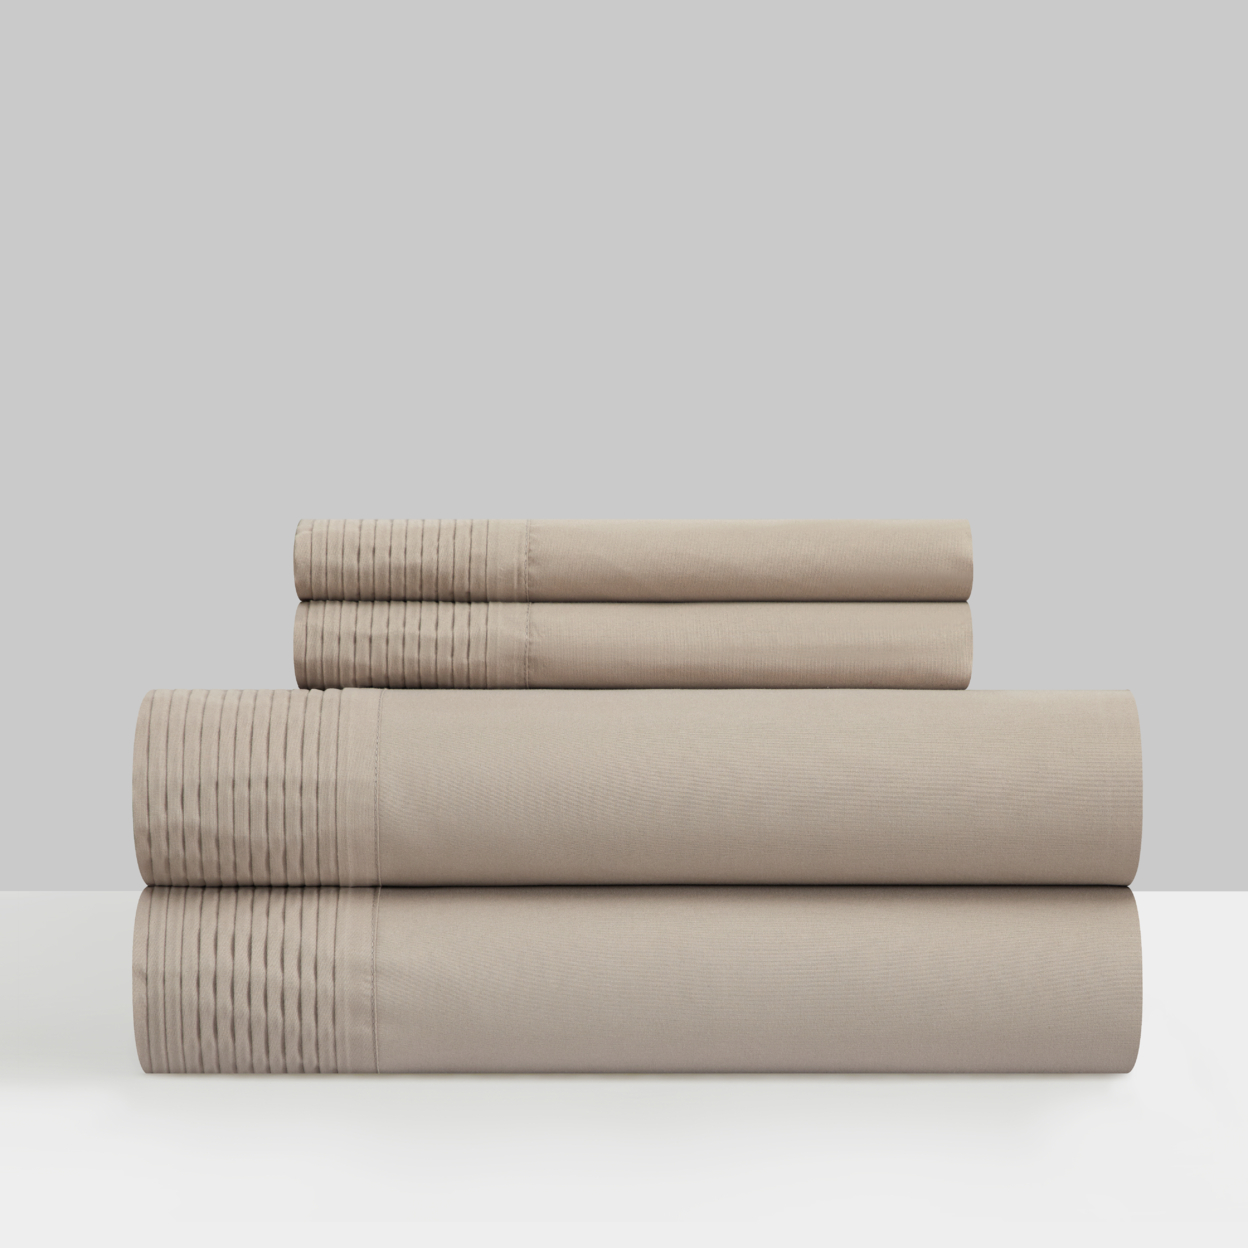 Barley 3 Or 4 Piece Sheet Set Solid Color With Pleated Details - Taupe, Twin